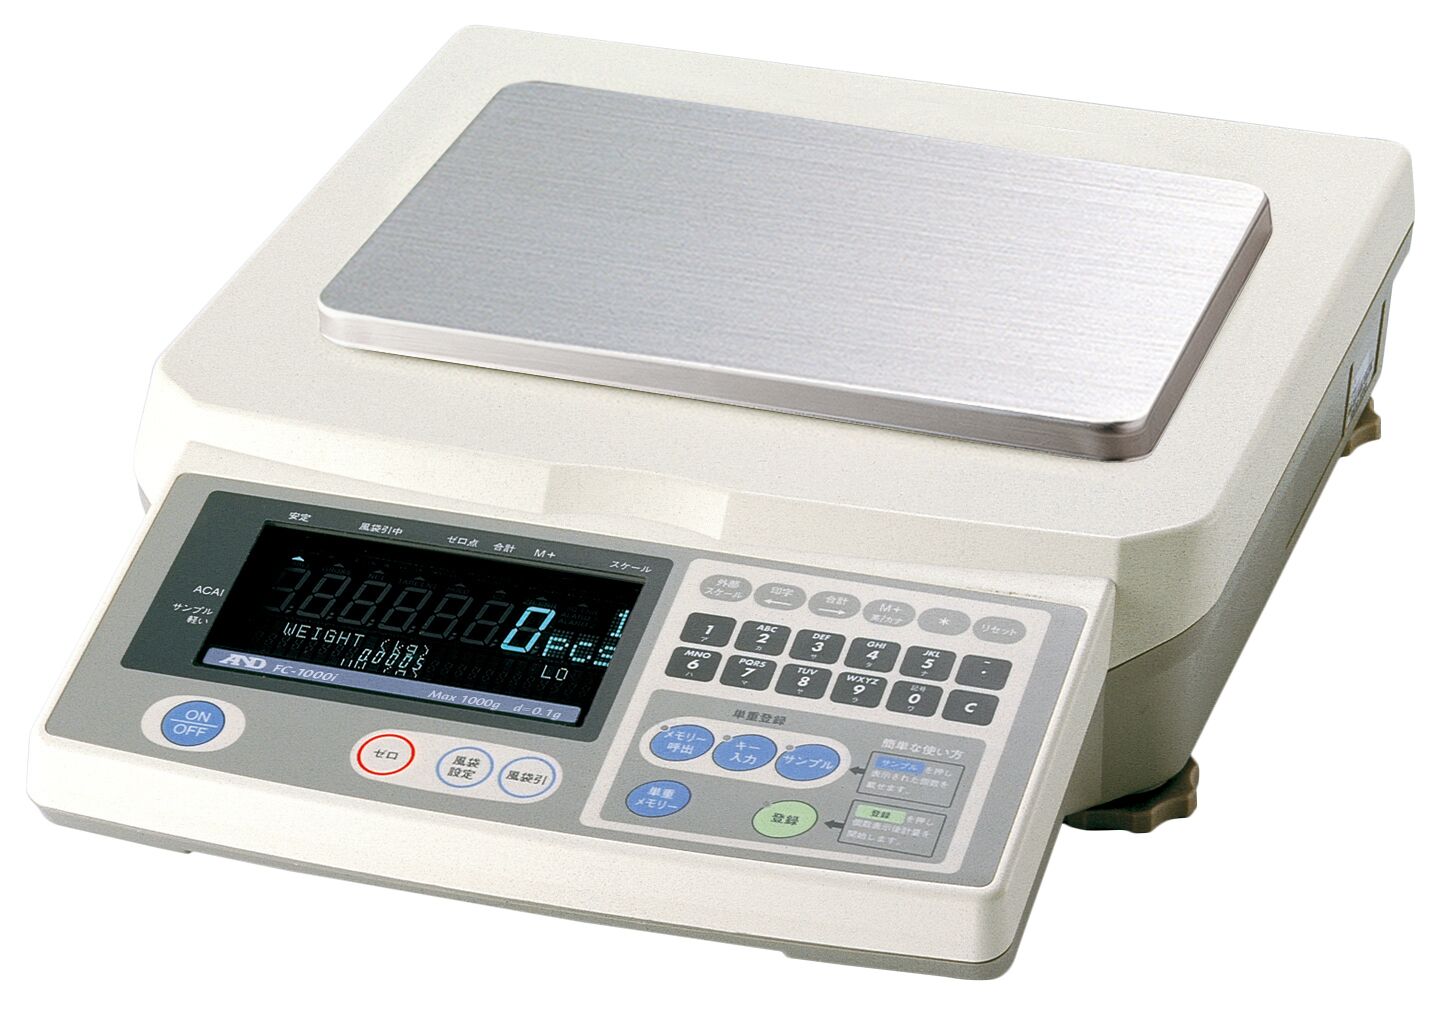 A&D FC-500i 500g x 0.05g High Performance Counting Scale